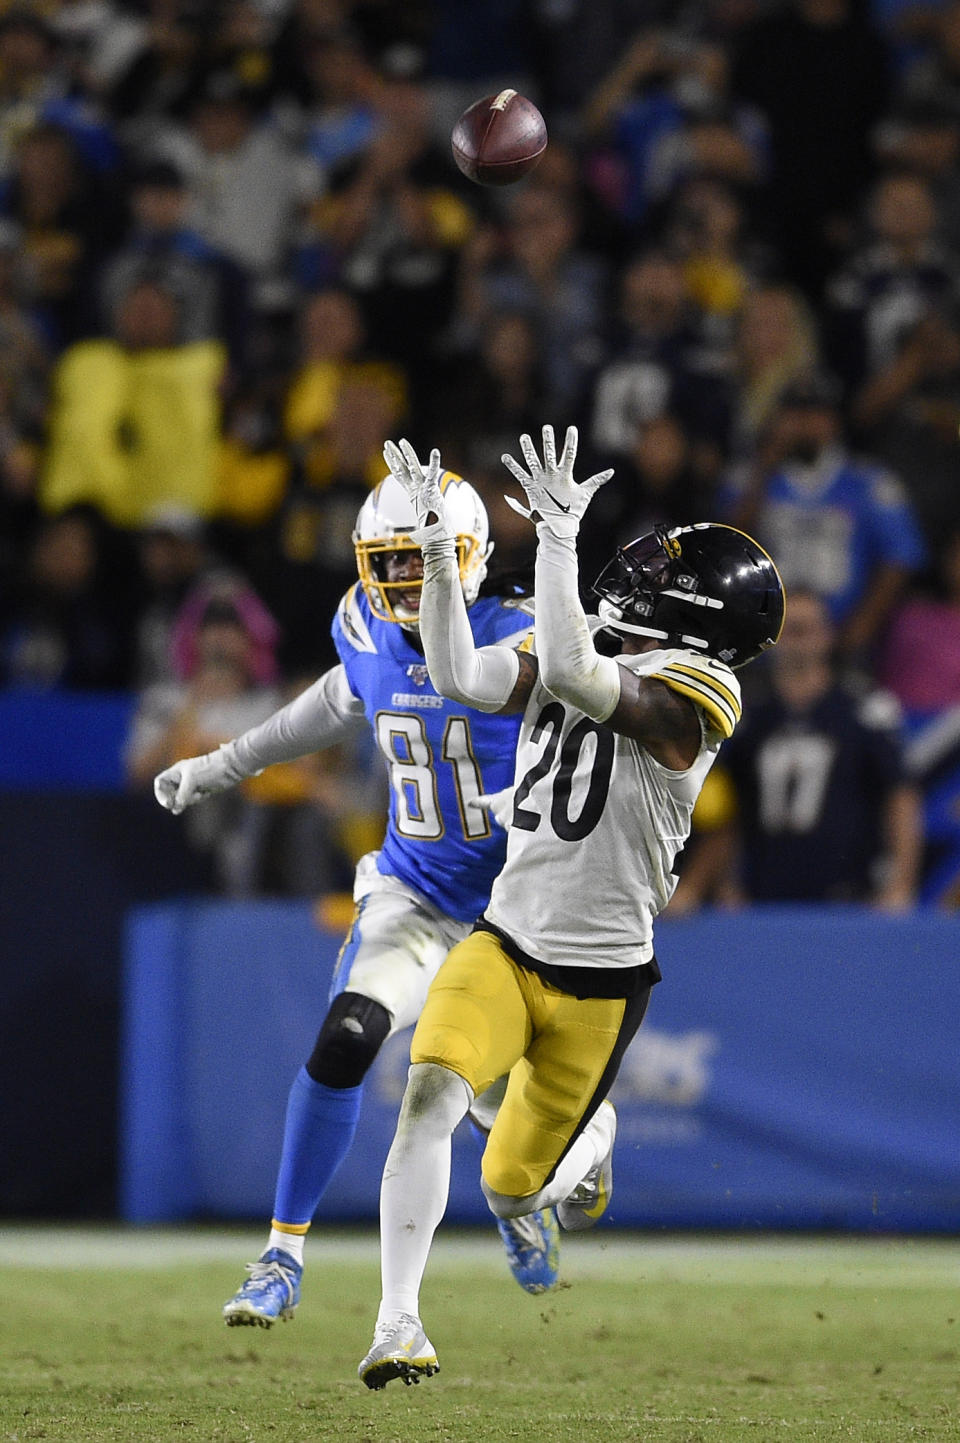 Pittsburgh Steelers cornerback Cameron Sutton, right, catches intercepts a pass intended for Los Angeles Chargers wide receiver Mike Williams during the second half of an NFL football game, Sunday, Oct. 13, 2019, in Carson, Calif. (AP Photo/Kelvin Kuo)